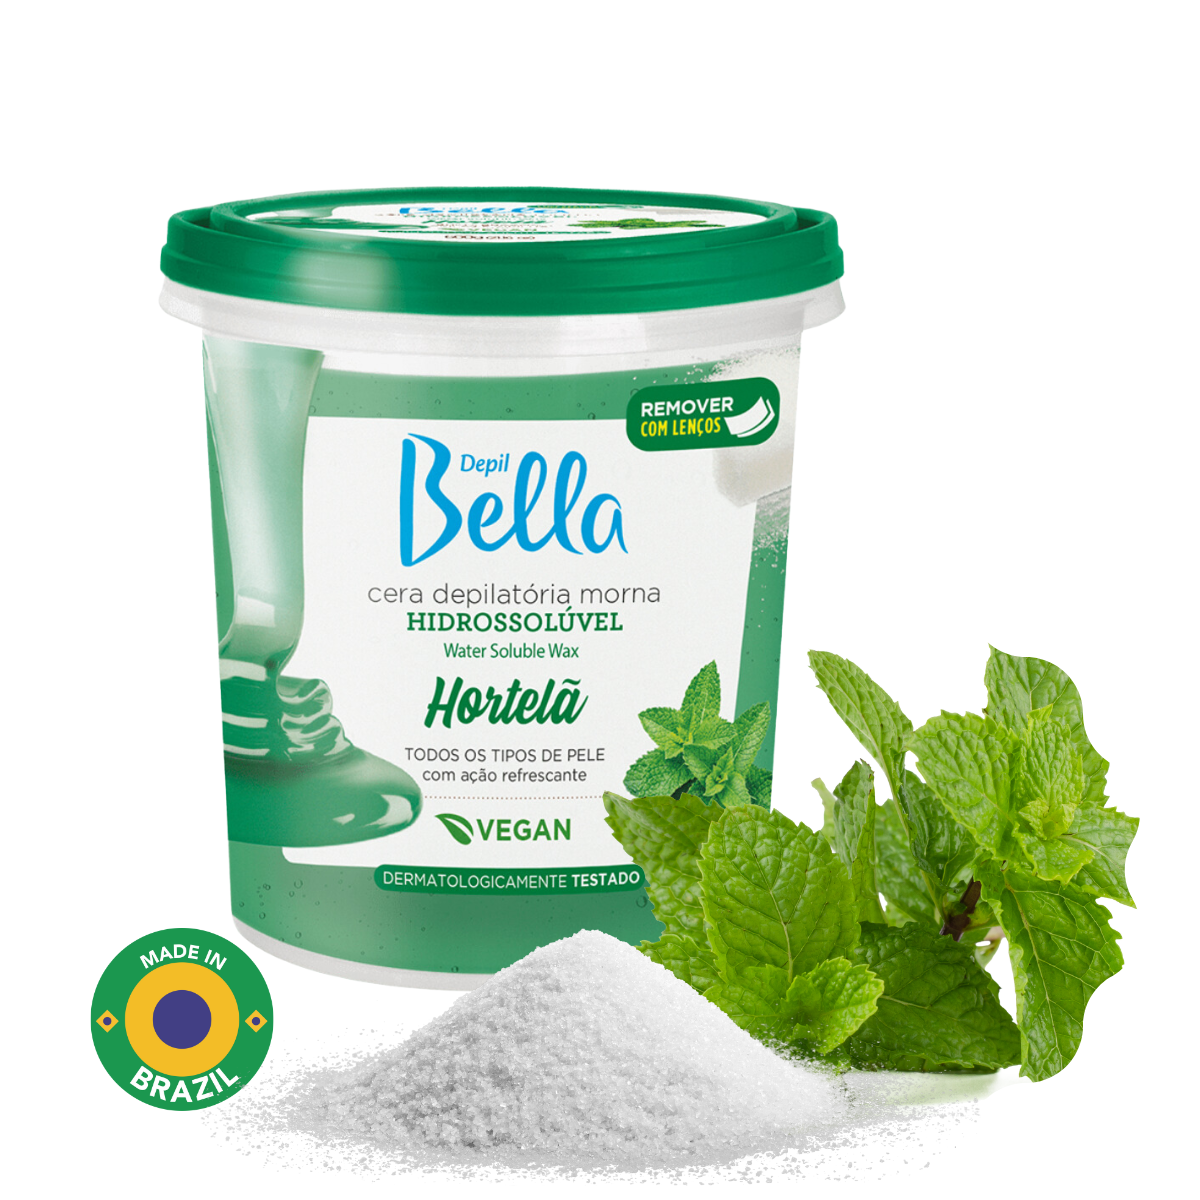 Refreshing mint wax by Depil Bella for hair removal